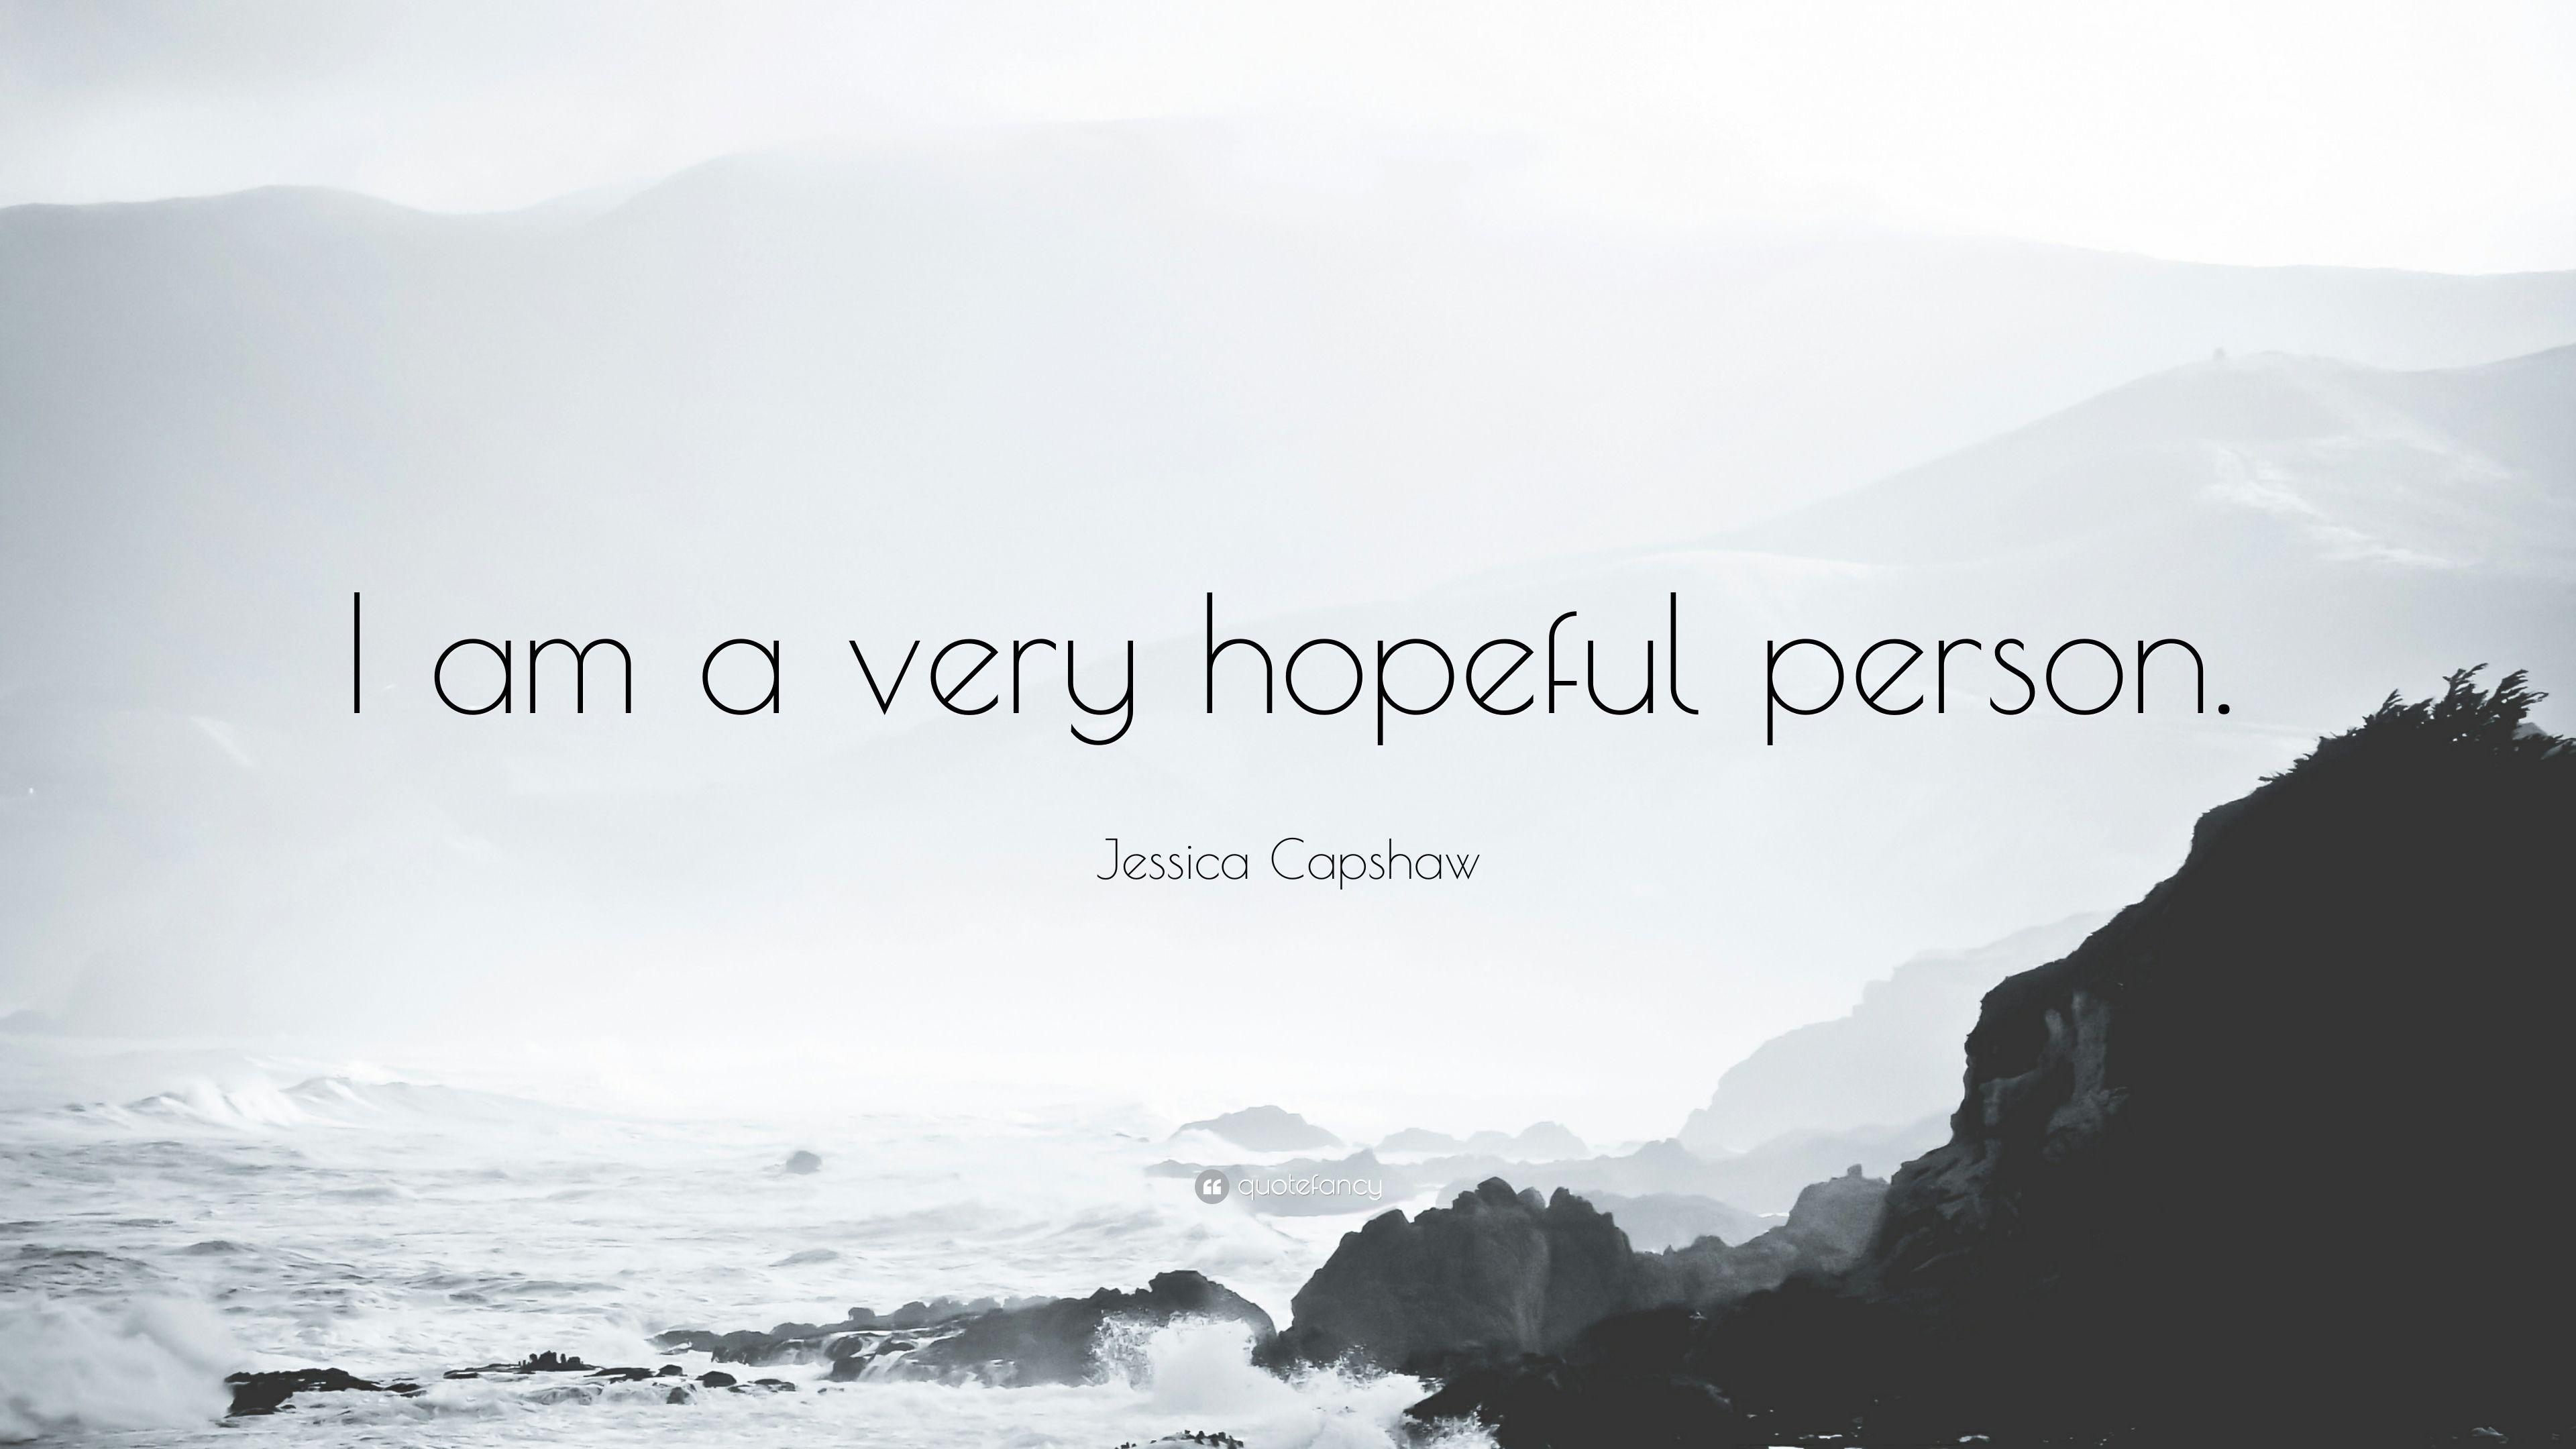 Jessica Capshaw Quote: “I am a very hopeful person.” 7 wallpaper